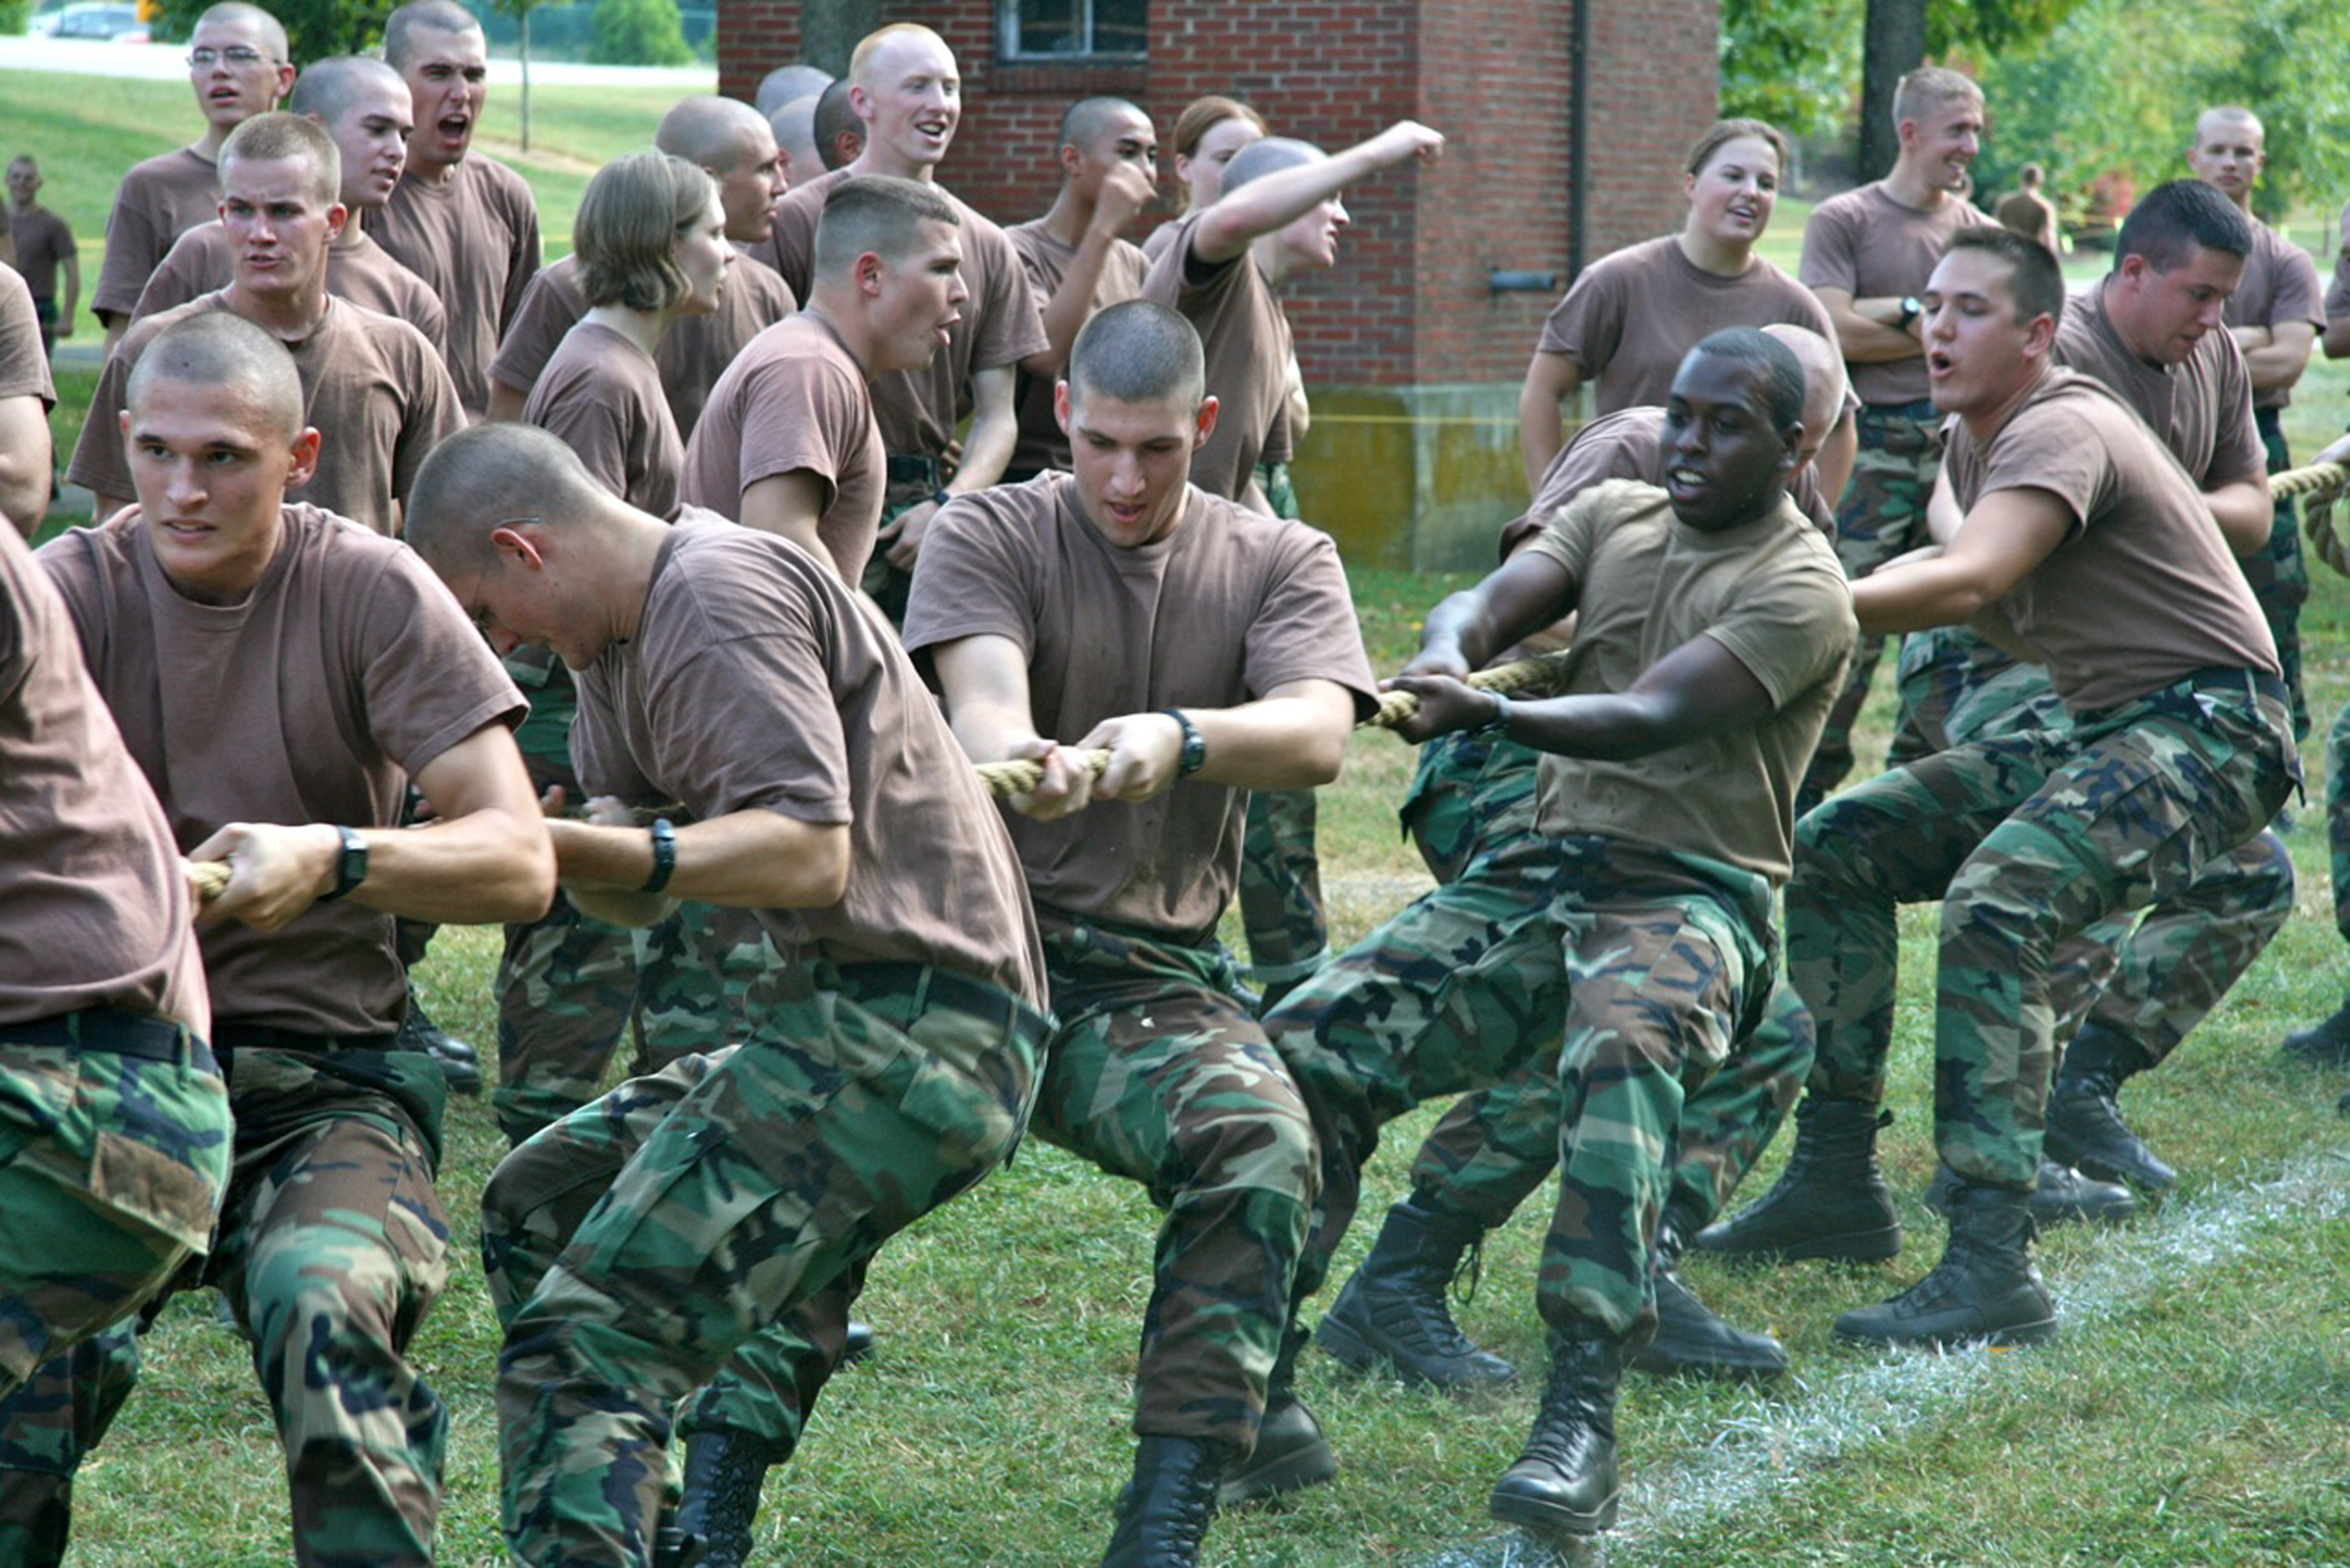 Members of the Virginia Tech Corps of Cadets take part in the tug of war event during the annual Ironman competition last fall